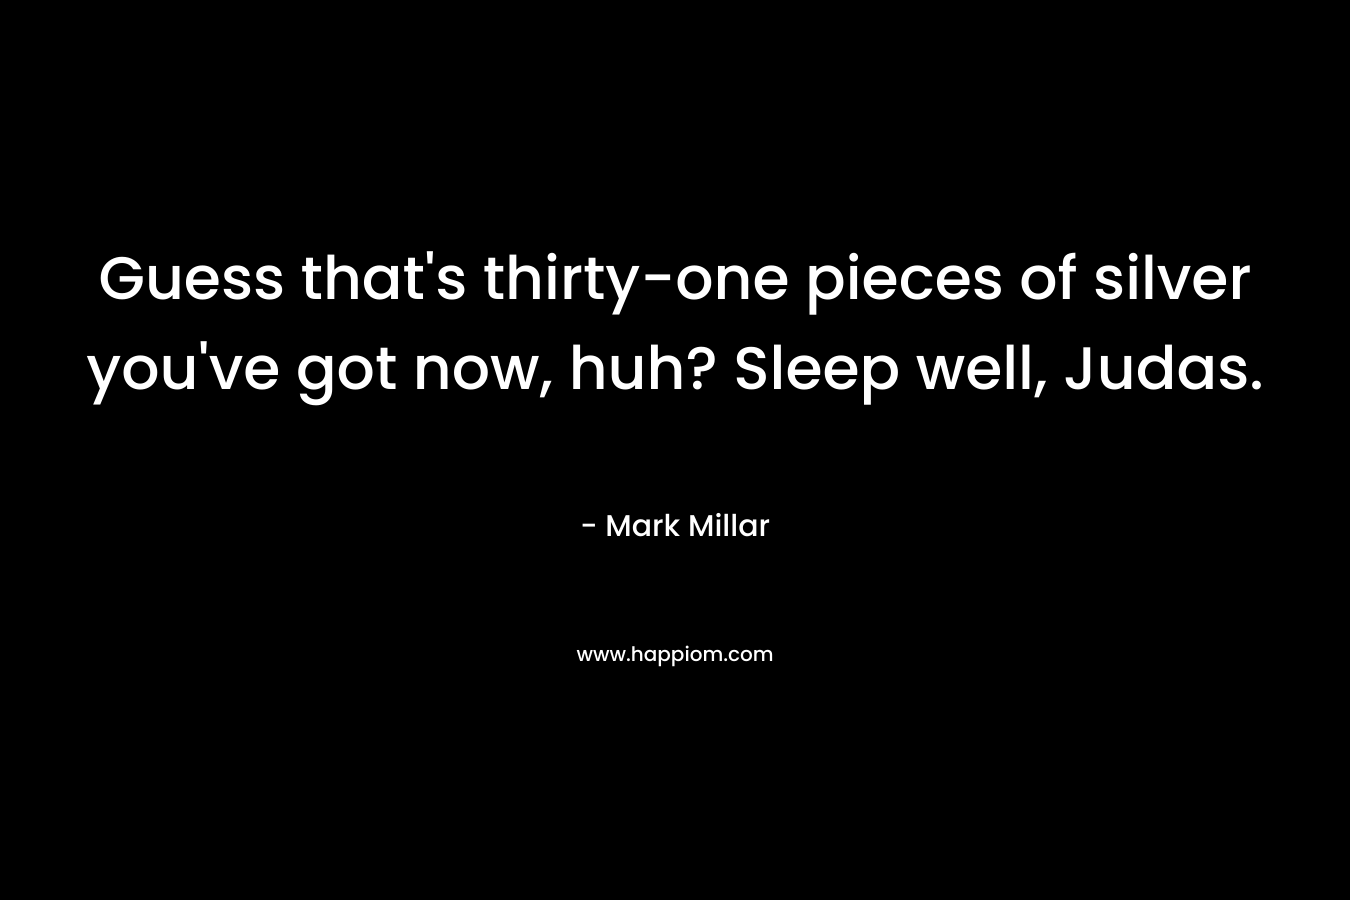 Guess that’s thirty-one pieces of silver you’ve got now, huh? Sleep well, Judas. – Mark Millar